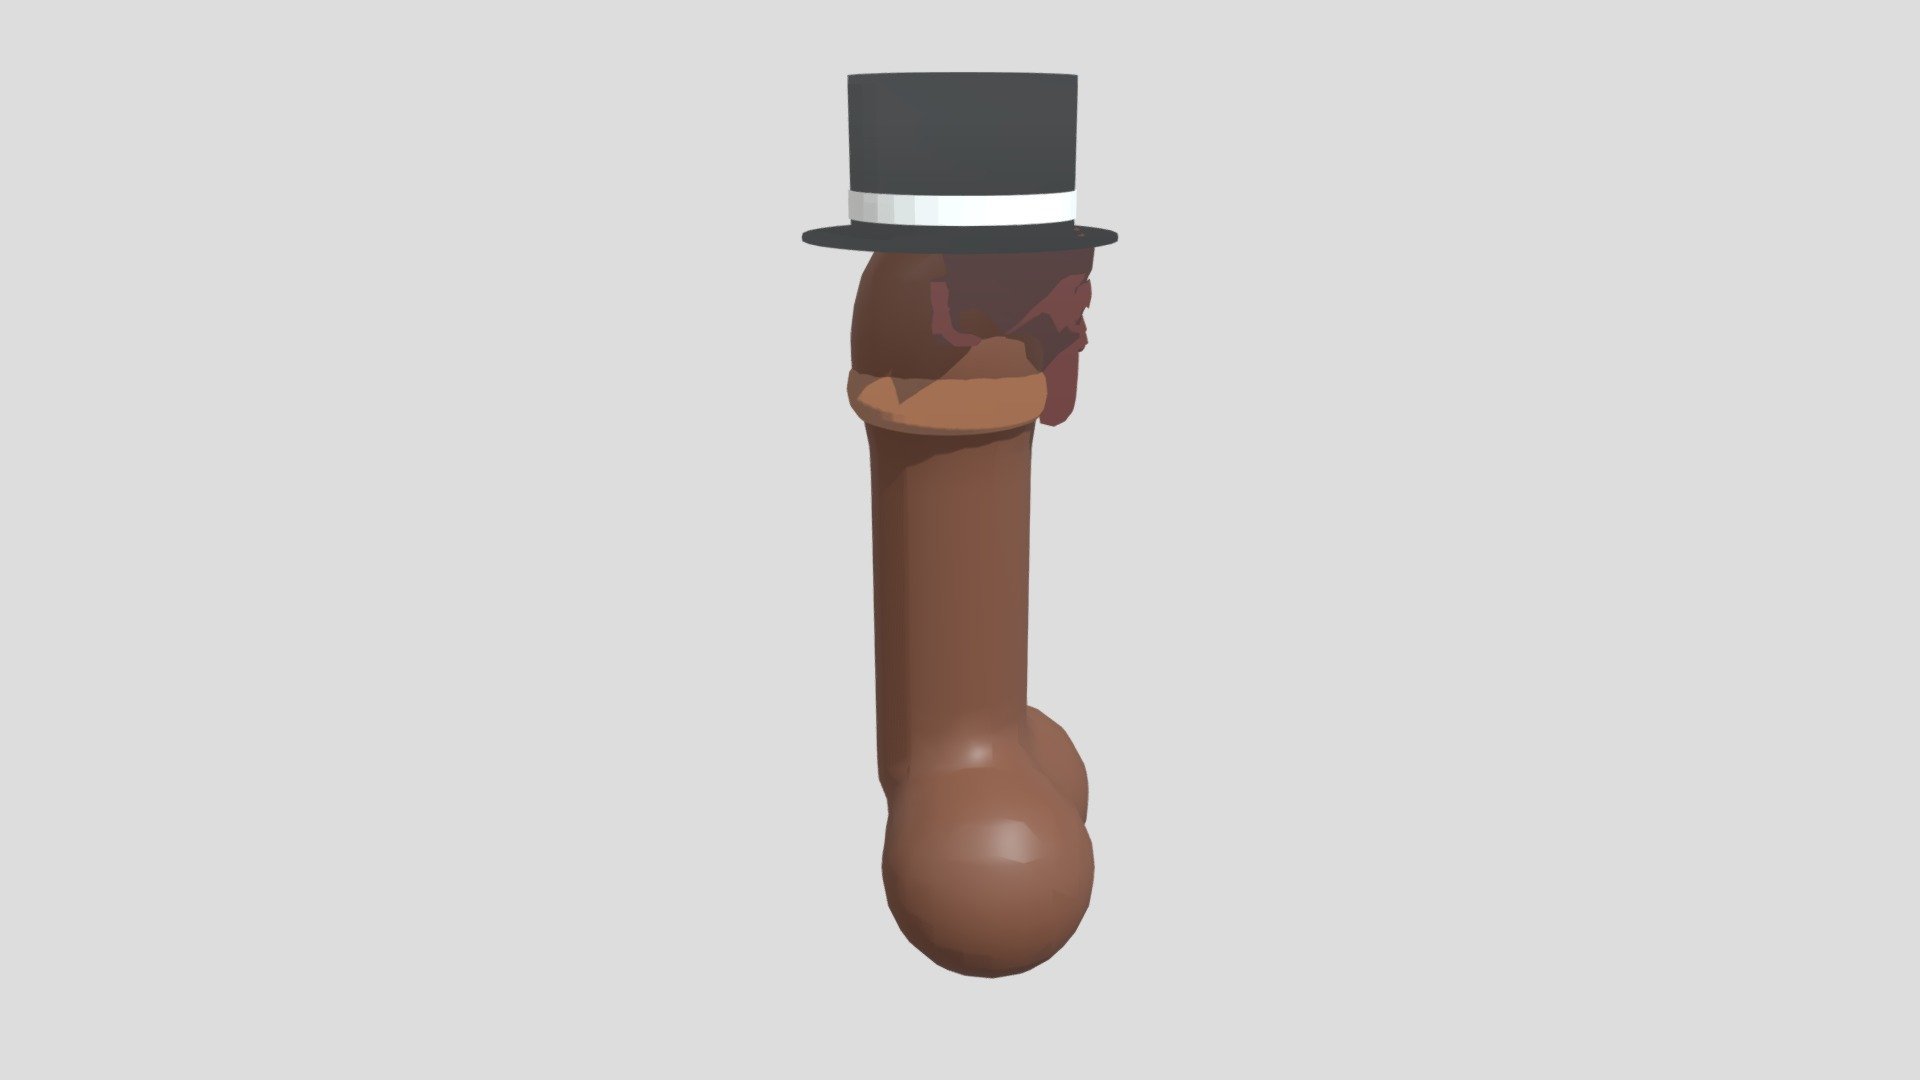 Ape Dick First creation.
If you want me to do one for you write me 3d model